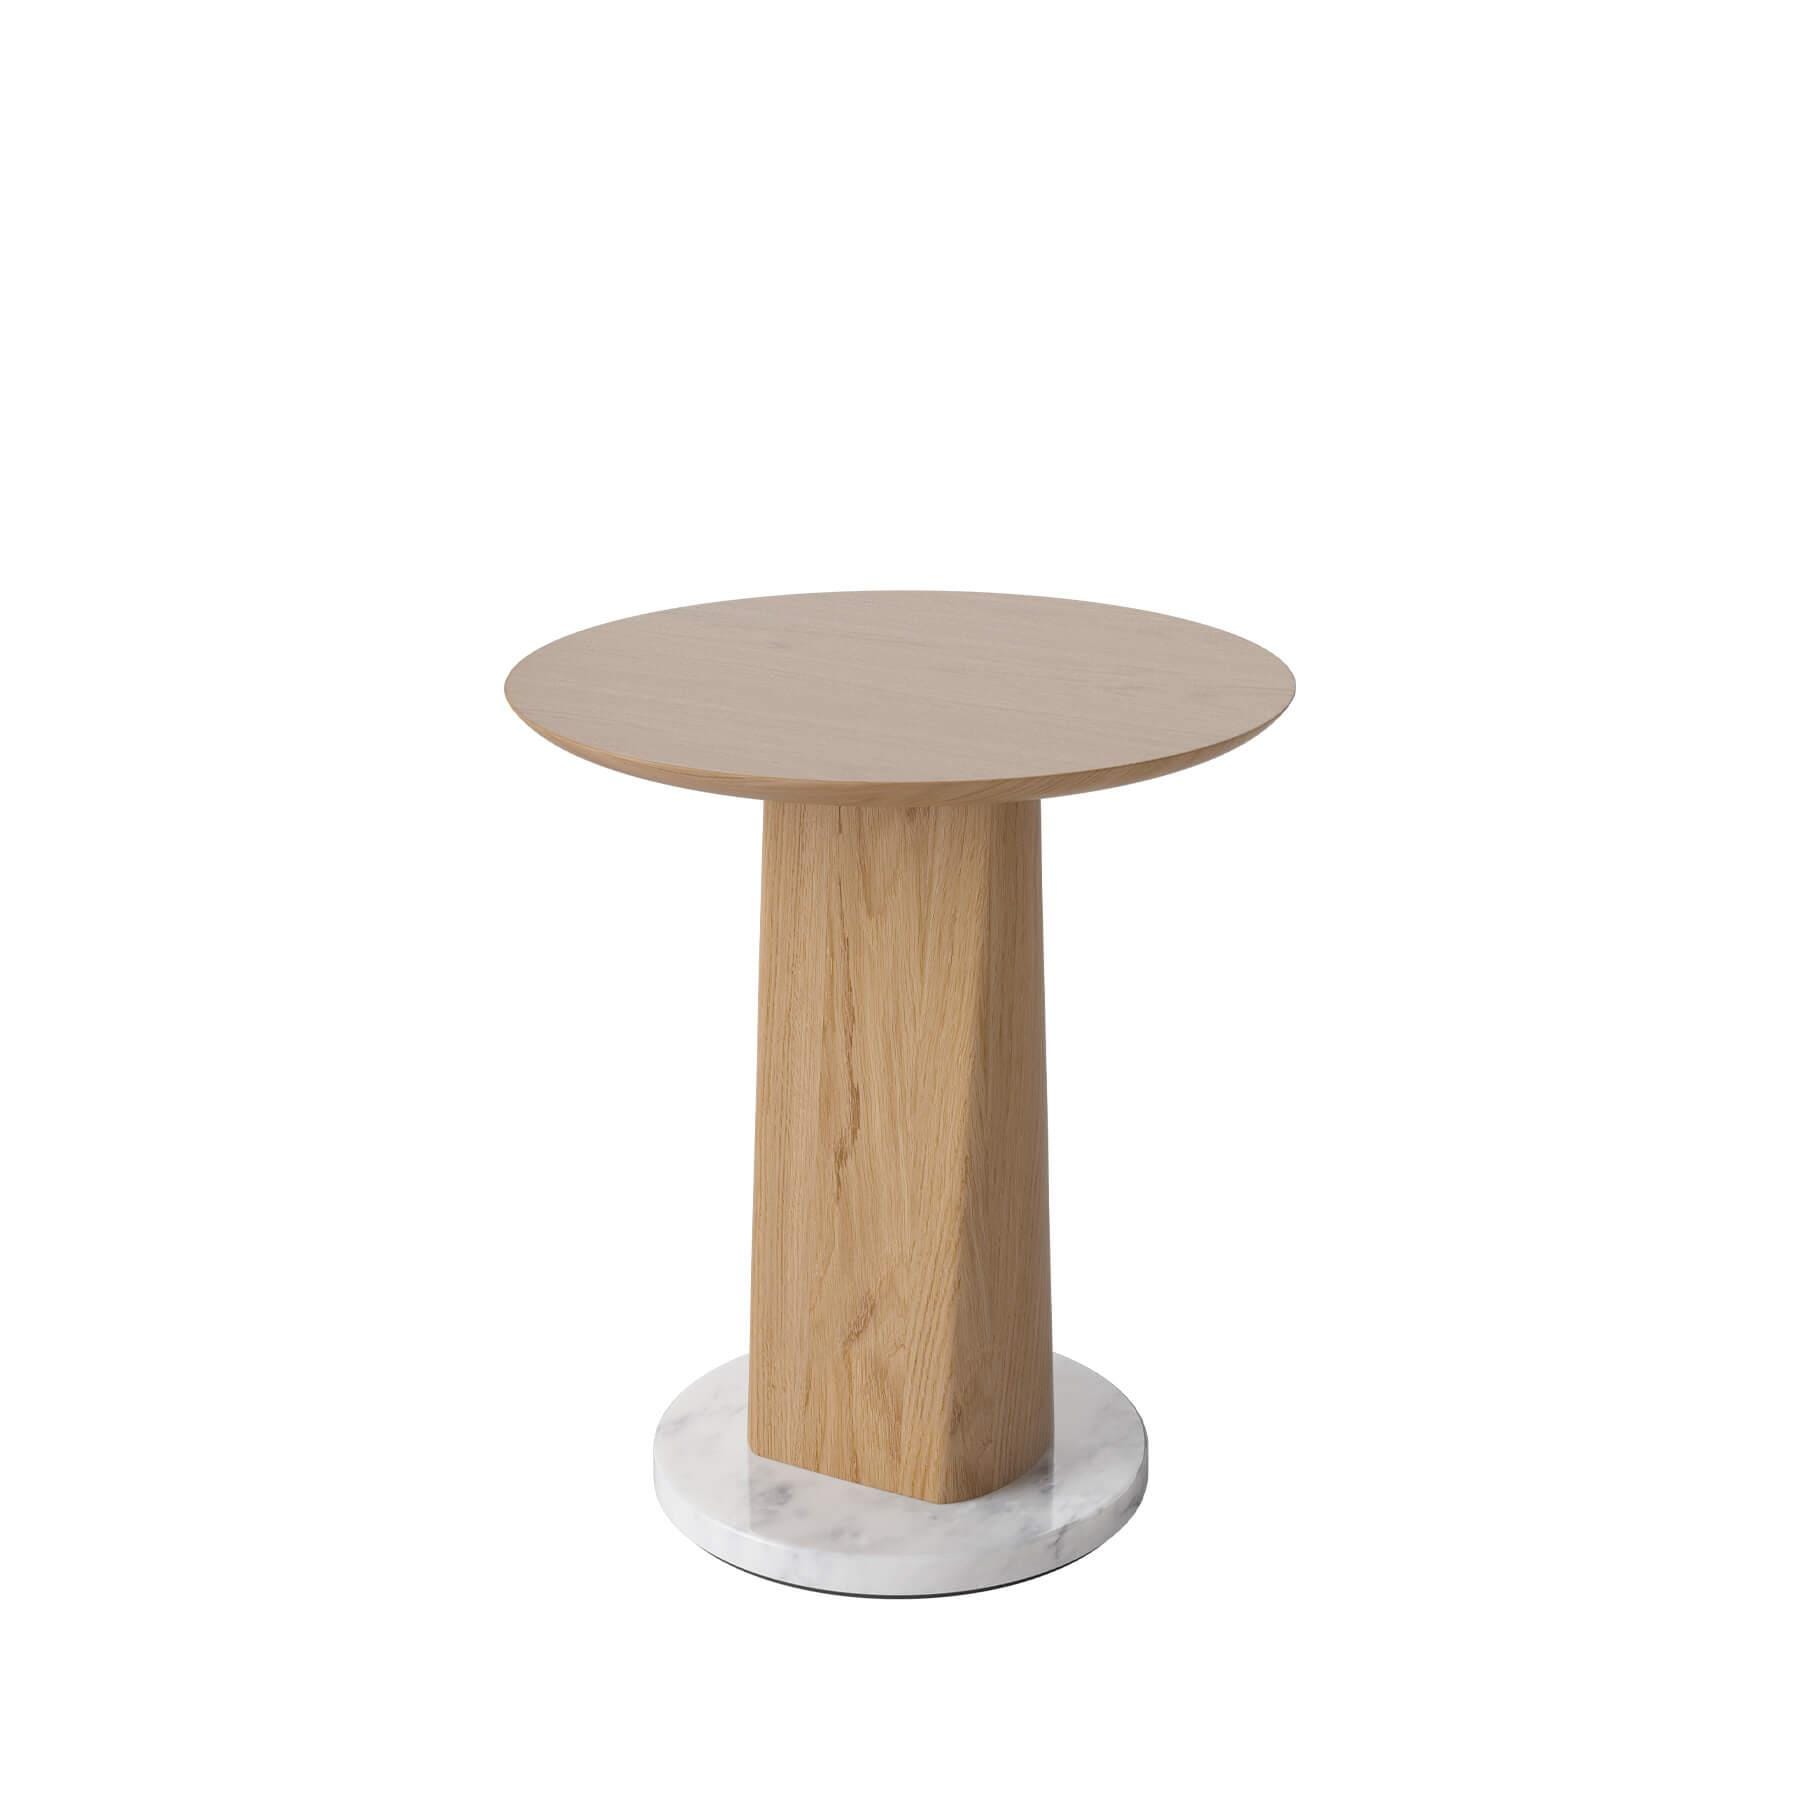 Bolia Root Side Table Small Low Oiled Oak Light Wood Designer Furniture From Holloways Of Ludlow